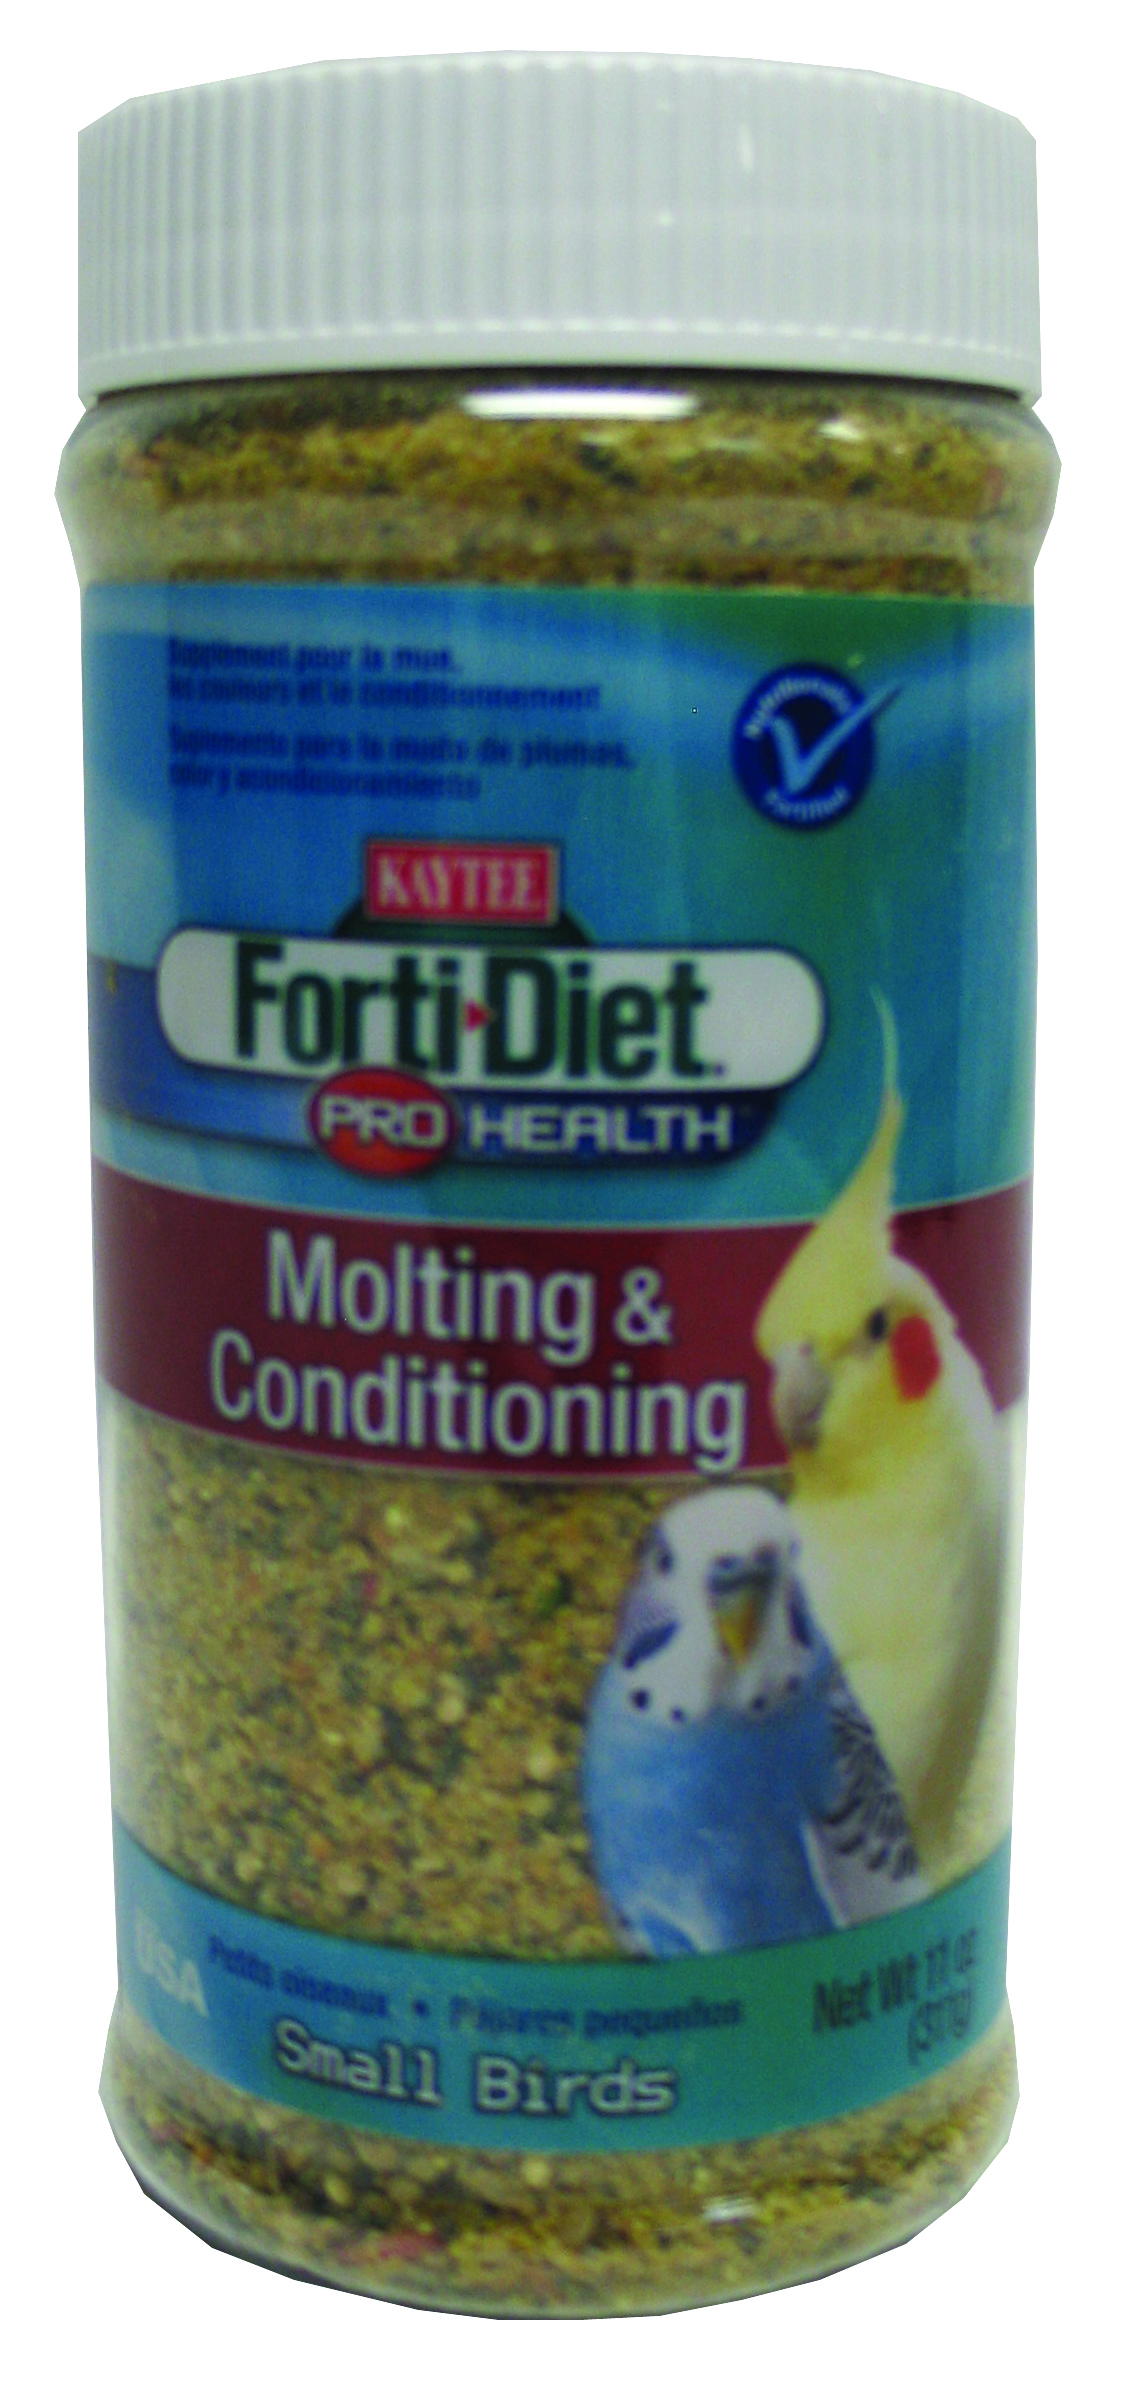 FORTI-DIET PRO HEALTH MOLTING & CONDITIONING